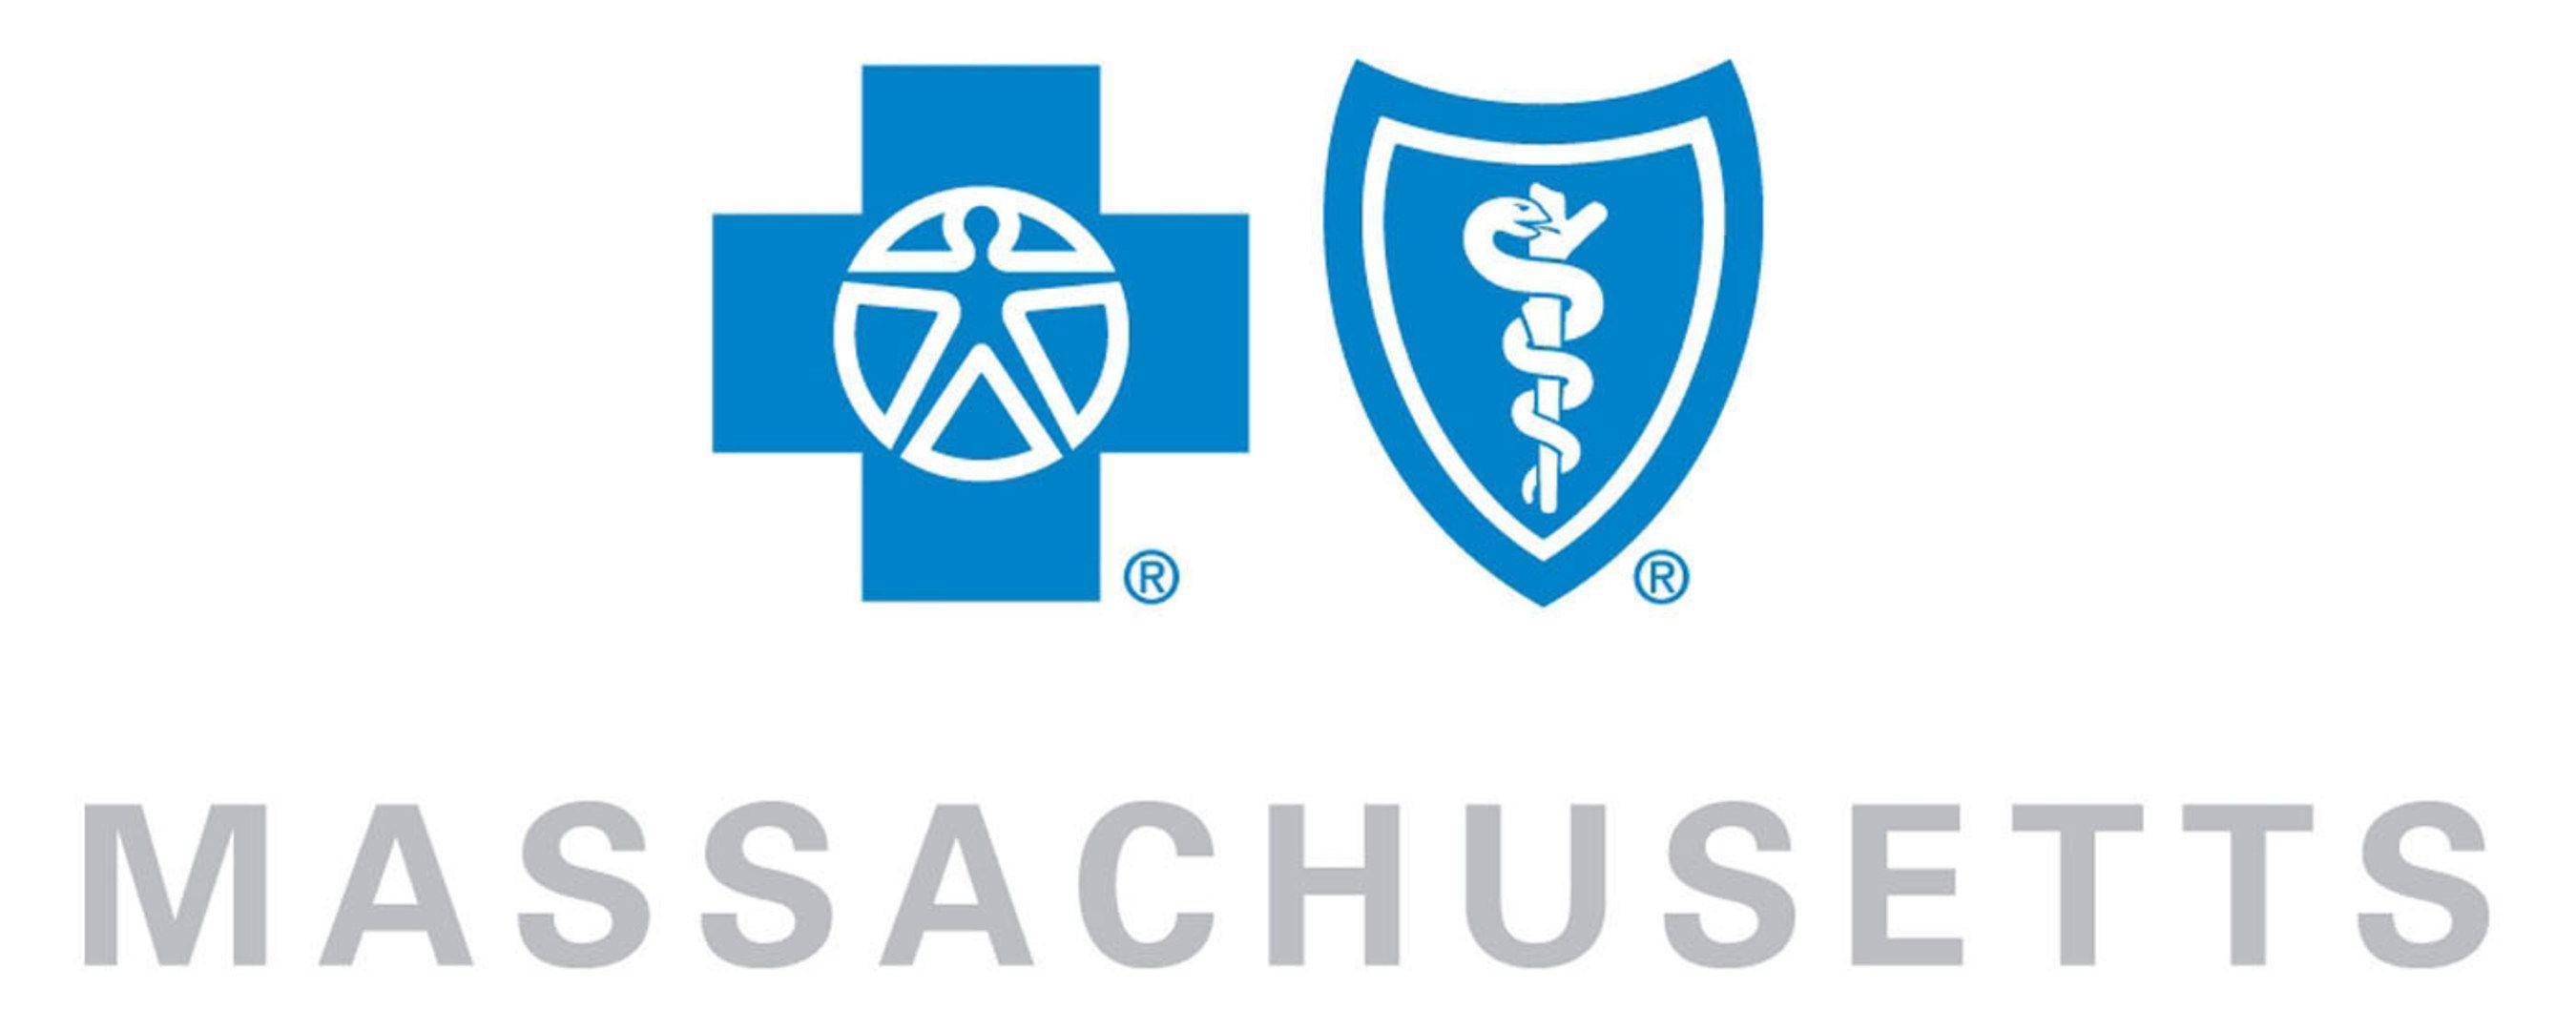 Blue Shield Logo - Blue Cross Blue Shield of Massachusetts Releases Statement on Repeal ...